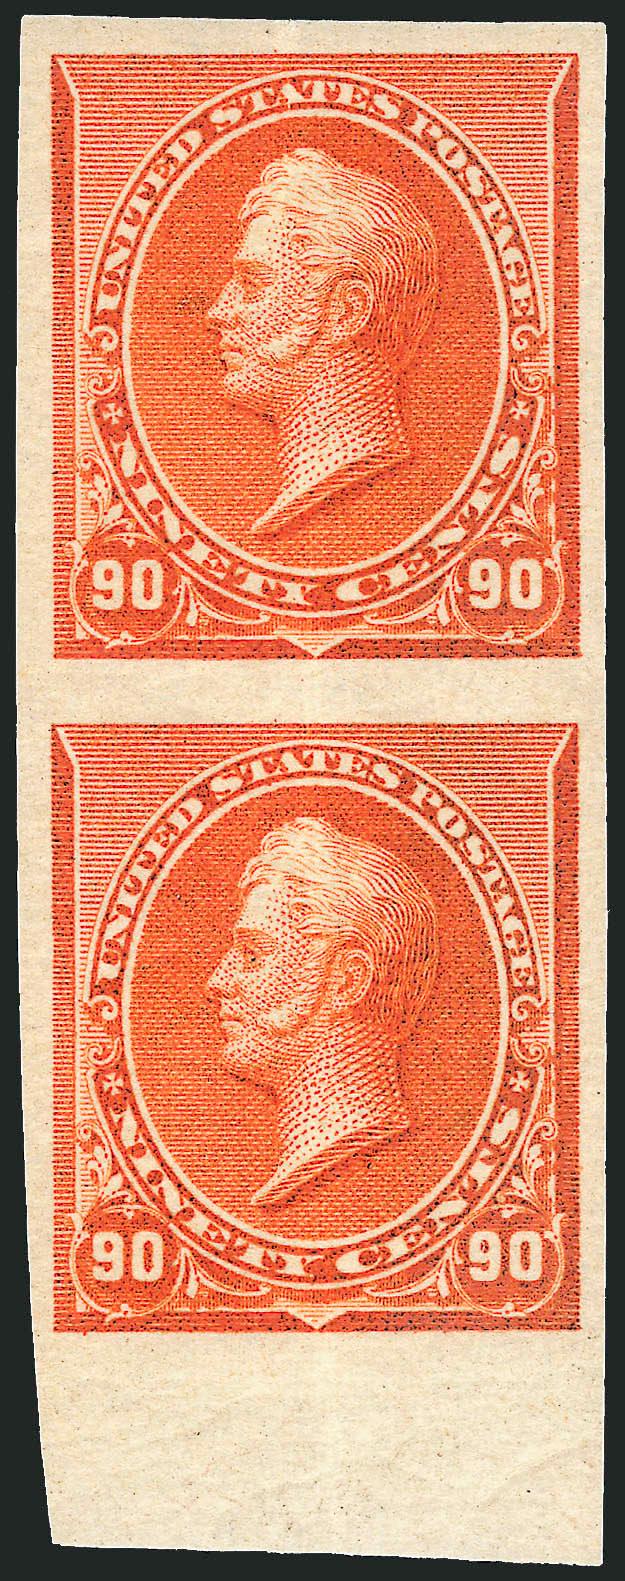 1c-90c 1890 Issue, Imperforate (219a-229a).> Complete set of pairs, 5c and 90c vertical, others horizontal, large margins to full, 2c Carmine and 15c with sheet margins, original gum, 90c natural vertical gum
crease, few minor imperfections<><>^FIN